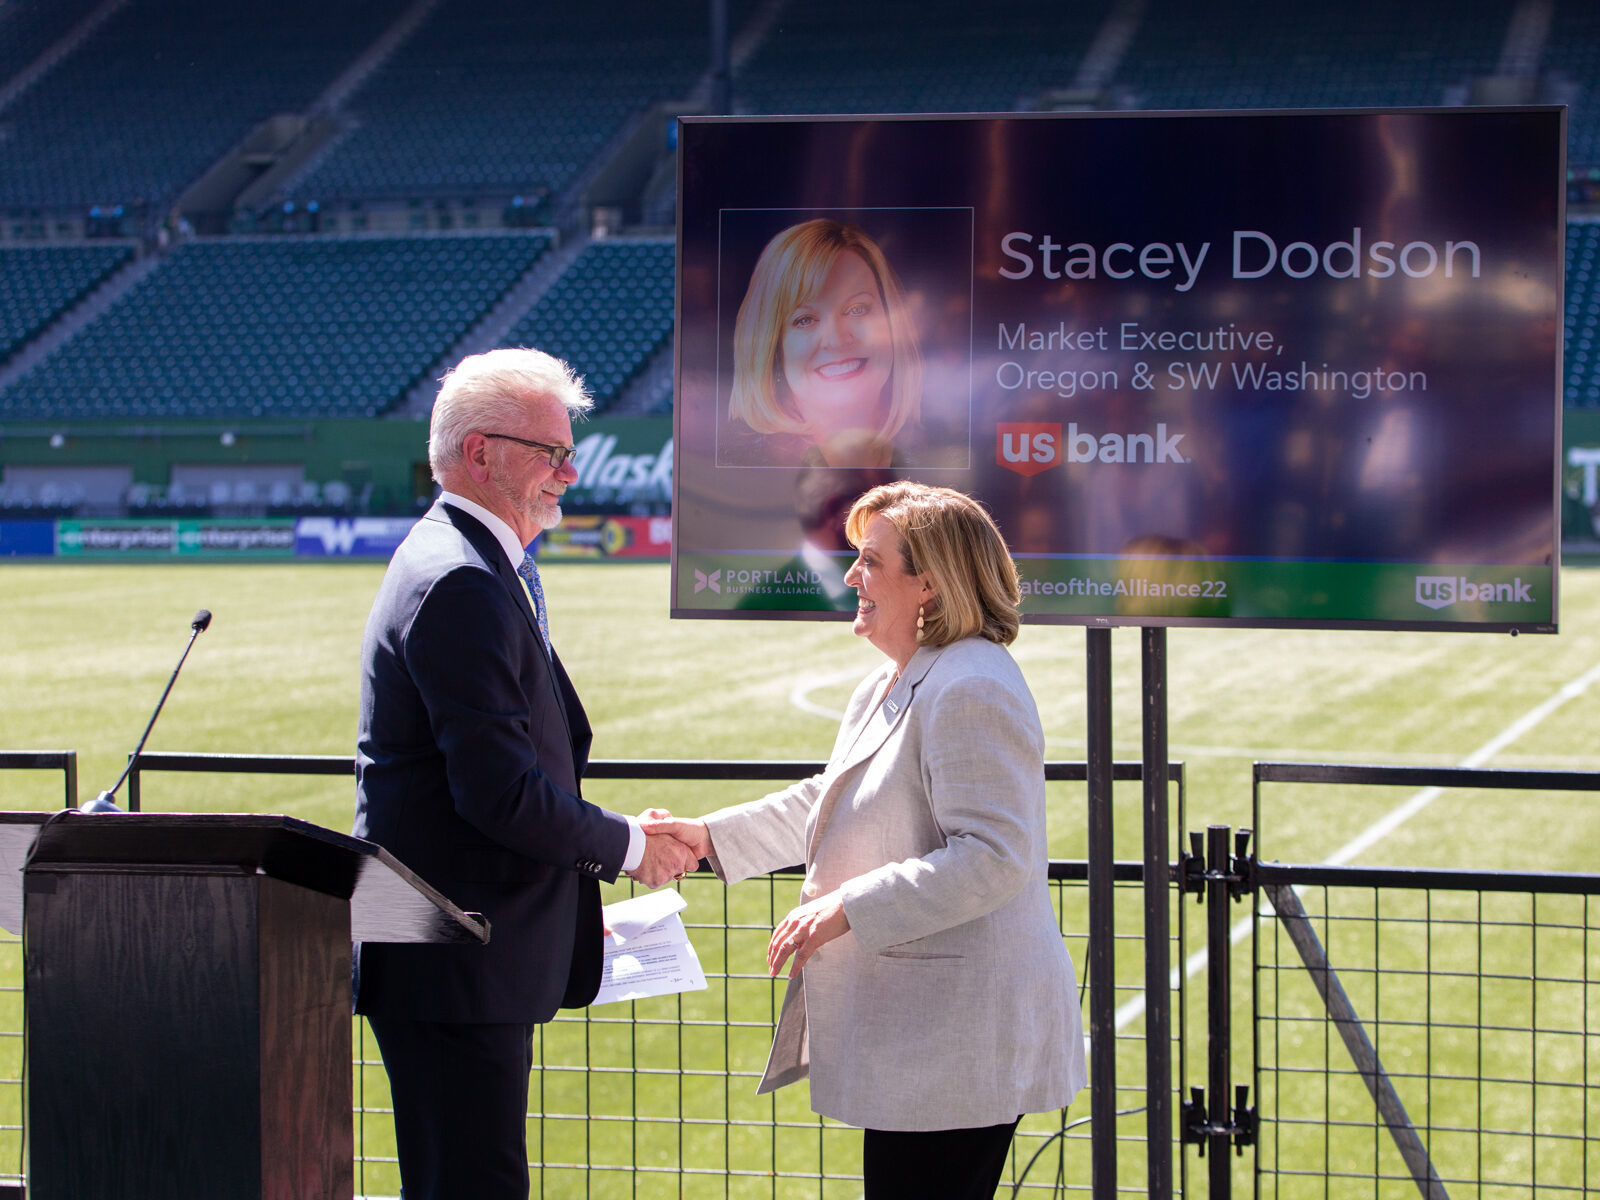 John Maher of the Oregonian and Stacey Dodson of U.S. Bank shake hands next to a podium